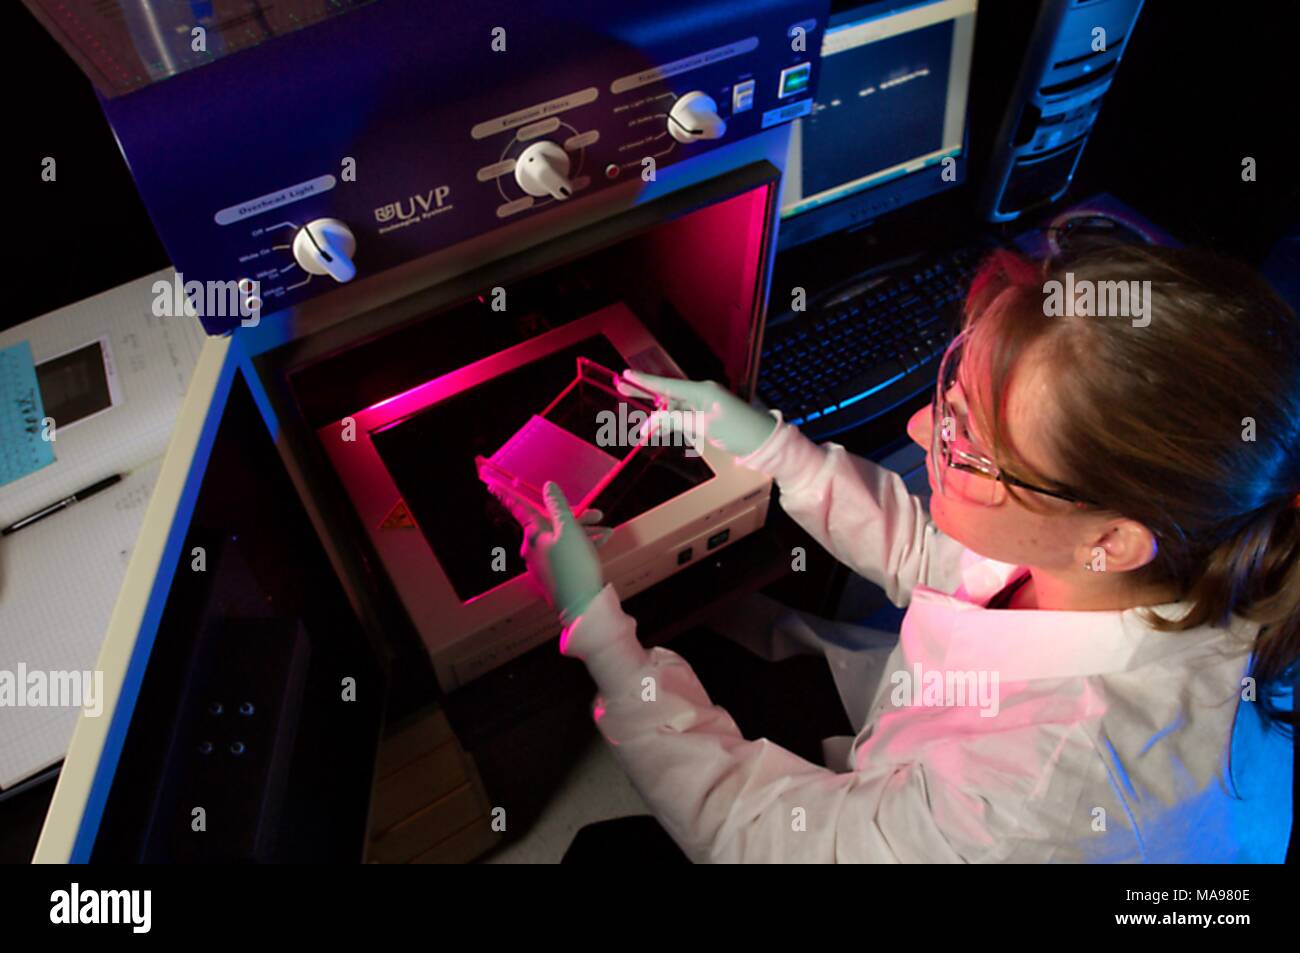 High angle photograph of Amanda McNulty, a NCHHSTP staff member, in a laboratory setting, holding an electrophoresis plate for DNA separation over the UVP imaging System, in an effort to examine HIV resistance to antiretroviral drugs, in people from PEPFAR (President's Emergency Plan for AIDS Relief) countries, 2007. Image courtesy CDC/Hsi Liu. () Stock Photo